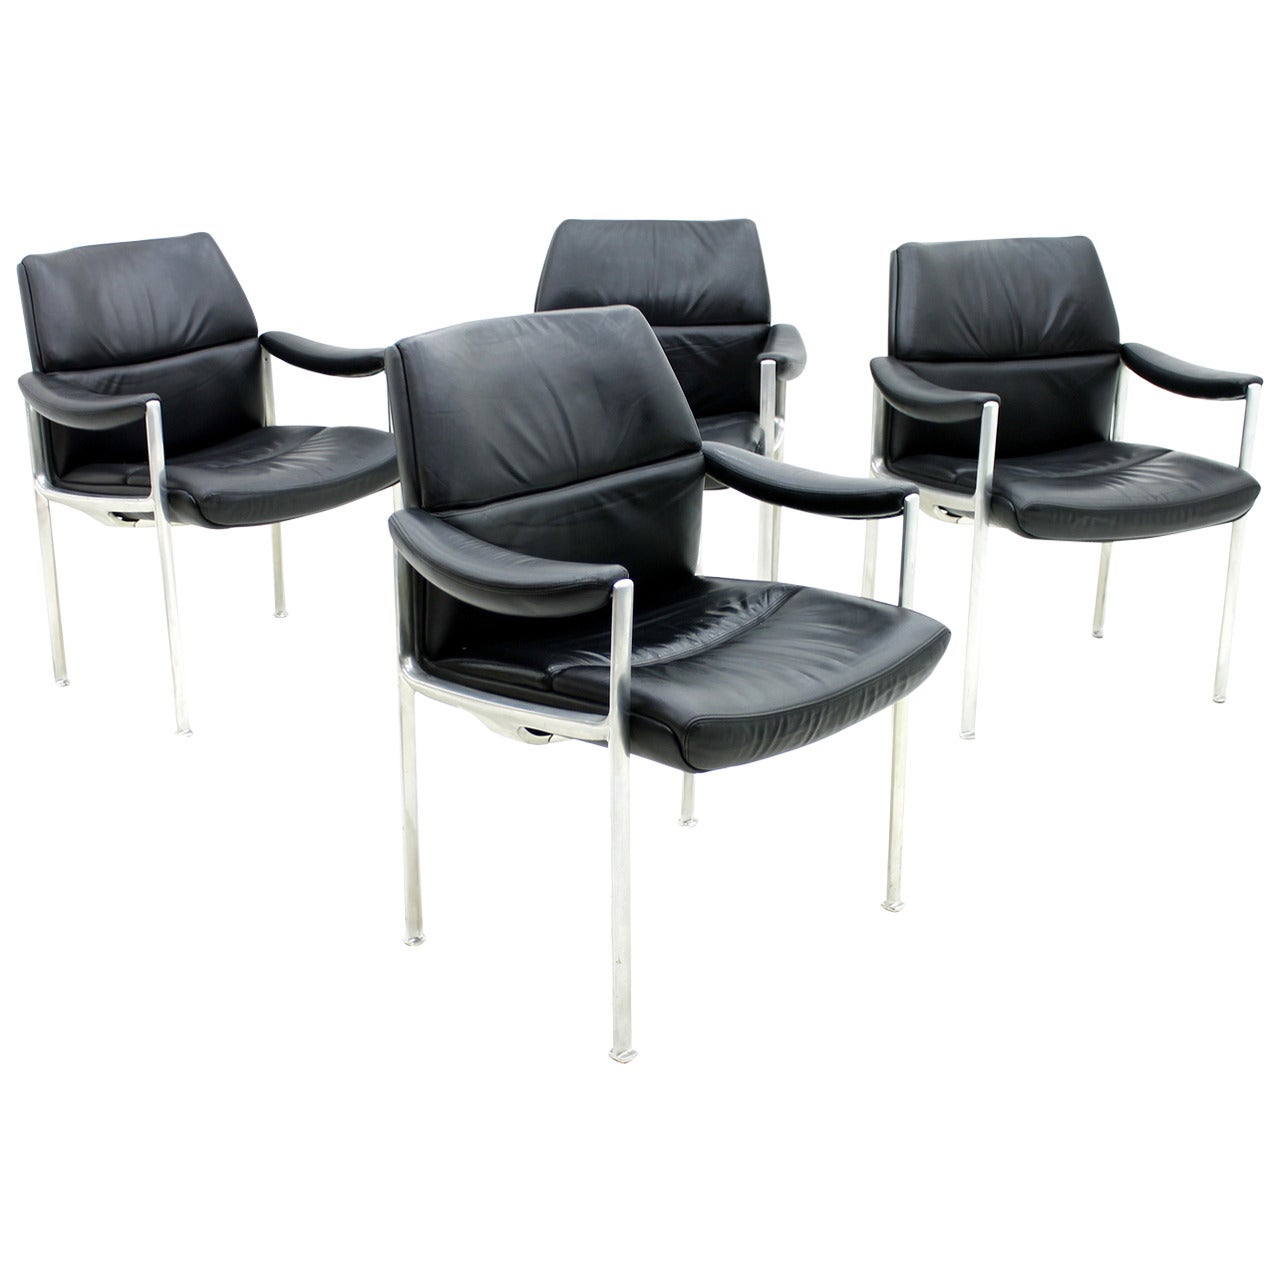 Set of Four Very Comfortable Conference Chairs, 1970s